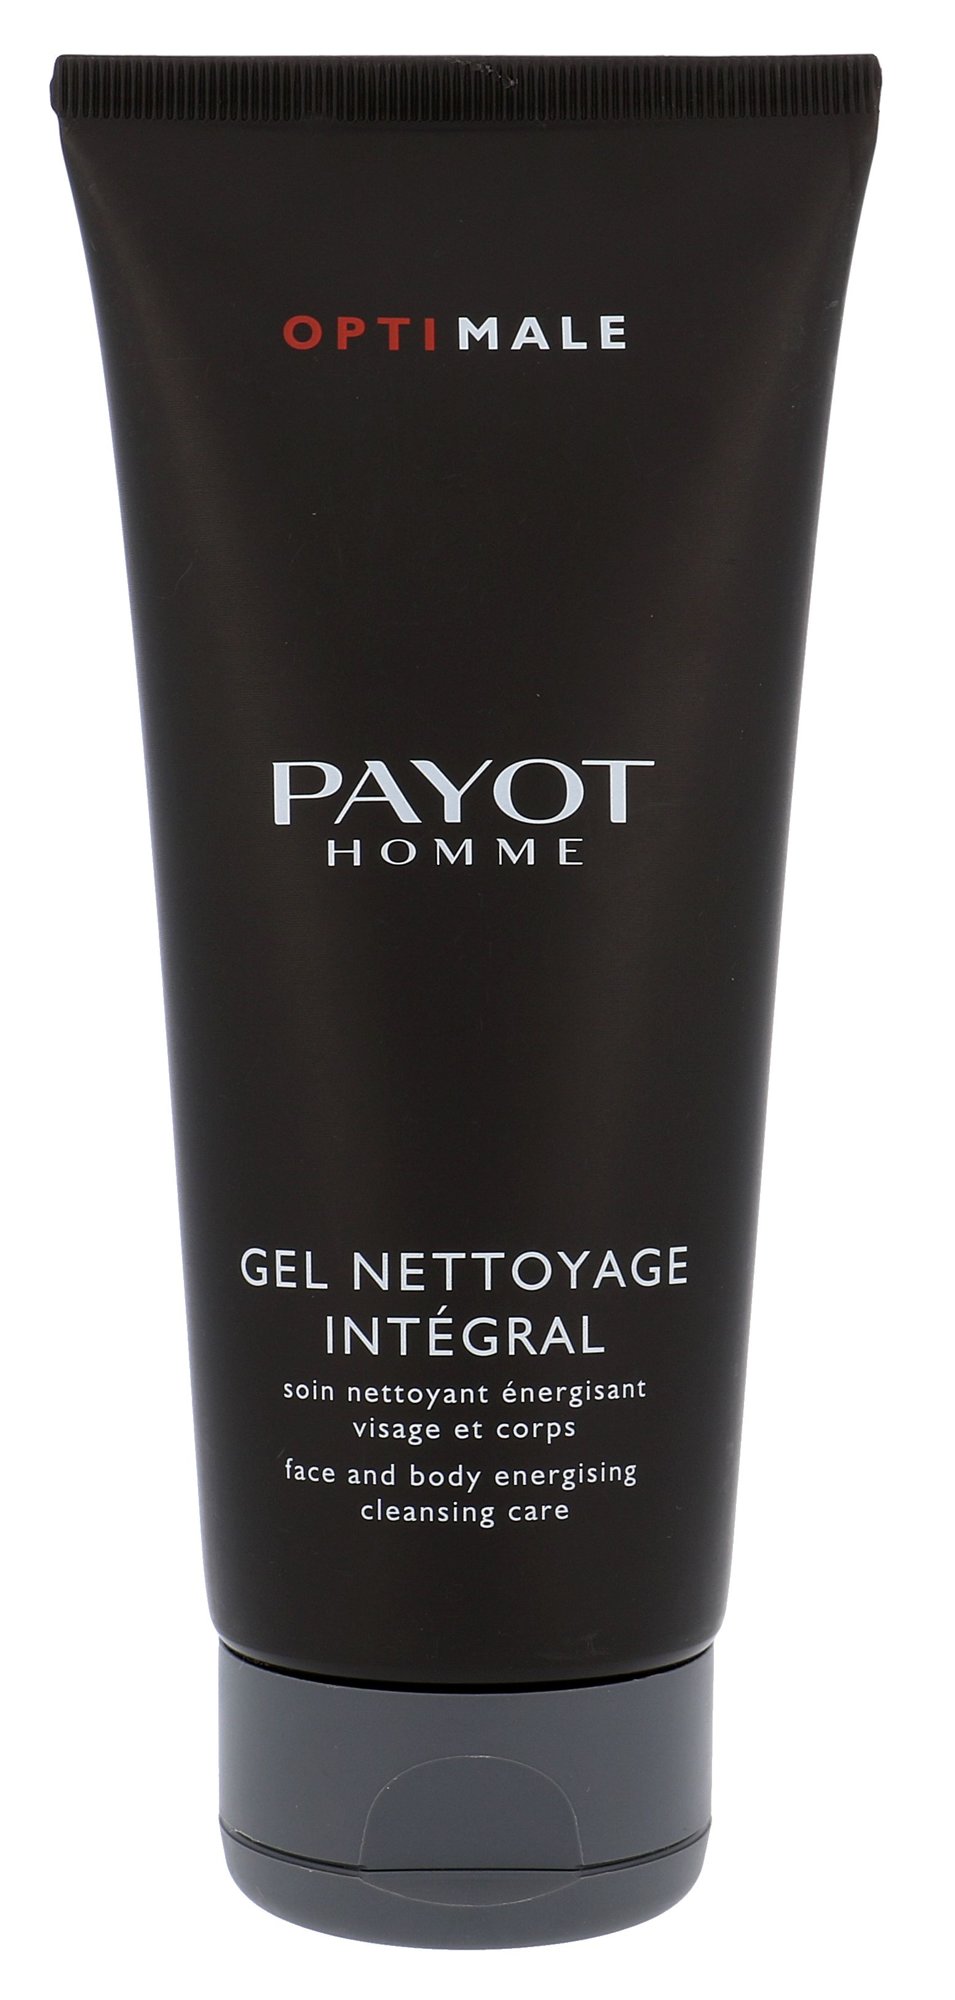 Payot Homme Optimale Face And Body Cleansing Care kūno gelis